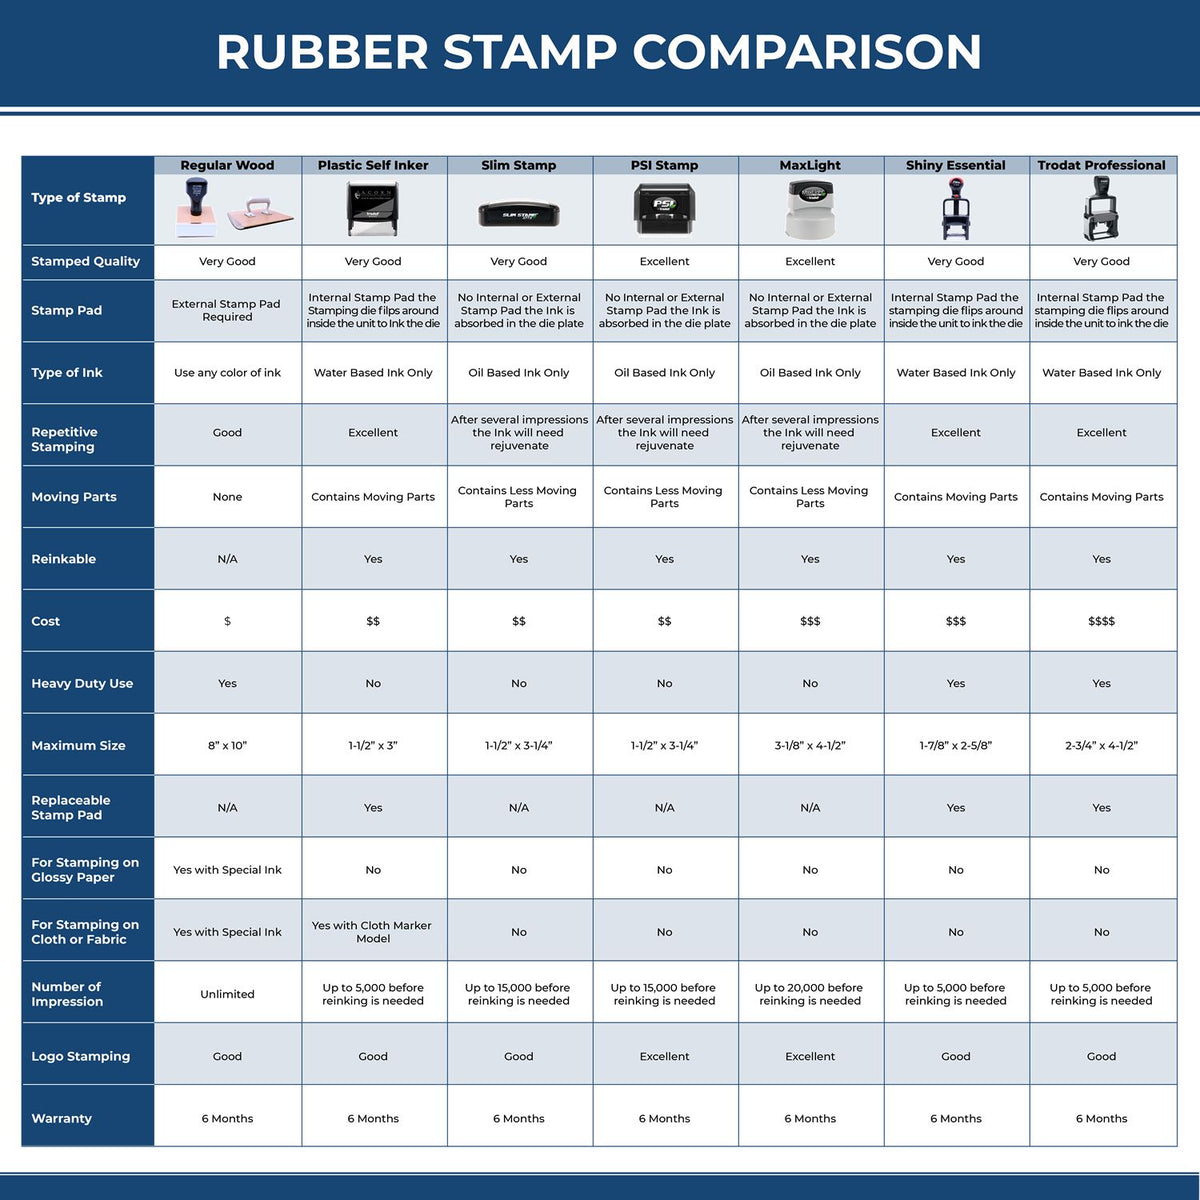 A comparison chart for the different types of mount models available for the Rhode Island Landscape Architectural Seal Stamp.